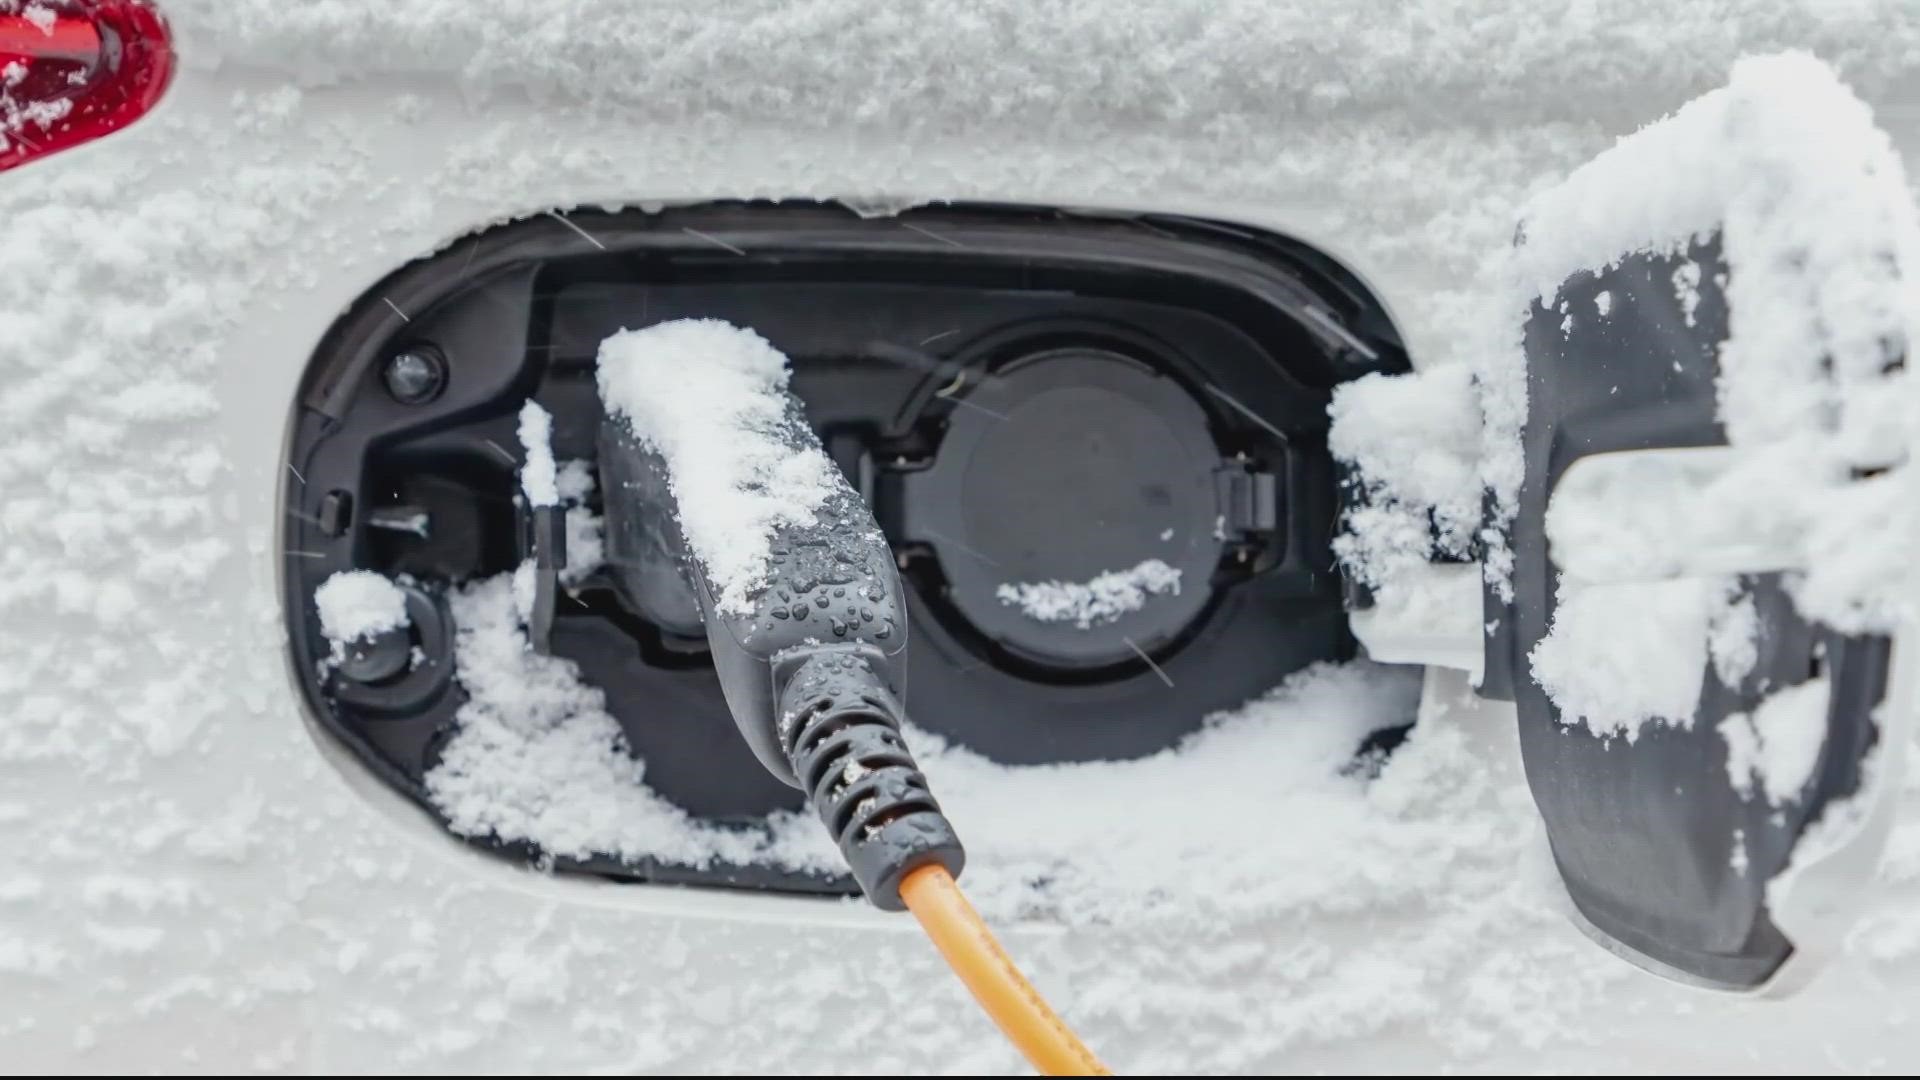 Experts say it may take a little longer to charge your electric vehicle outside when it's really cold, but it will still charge.